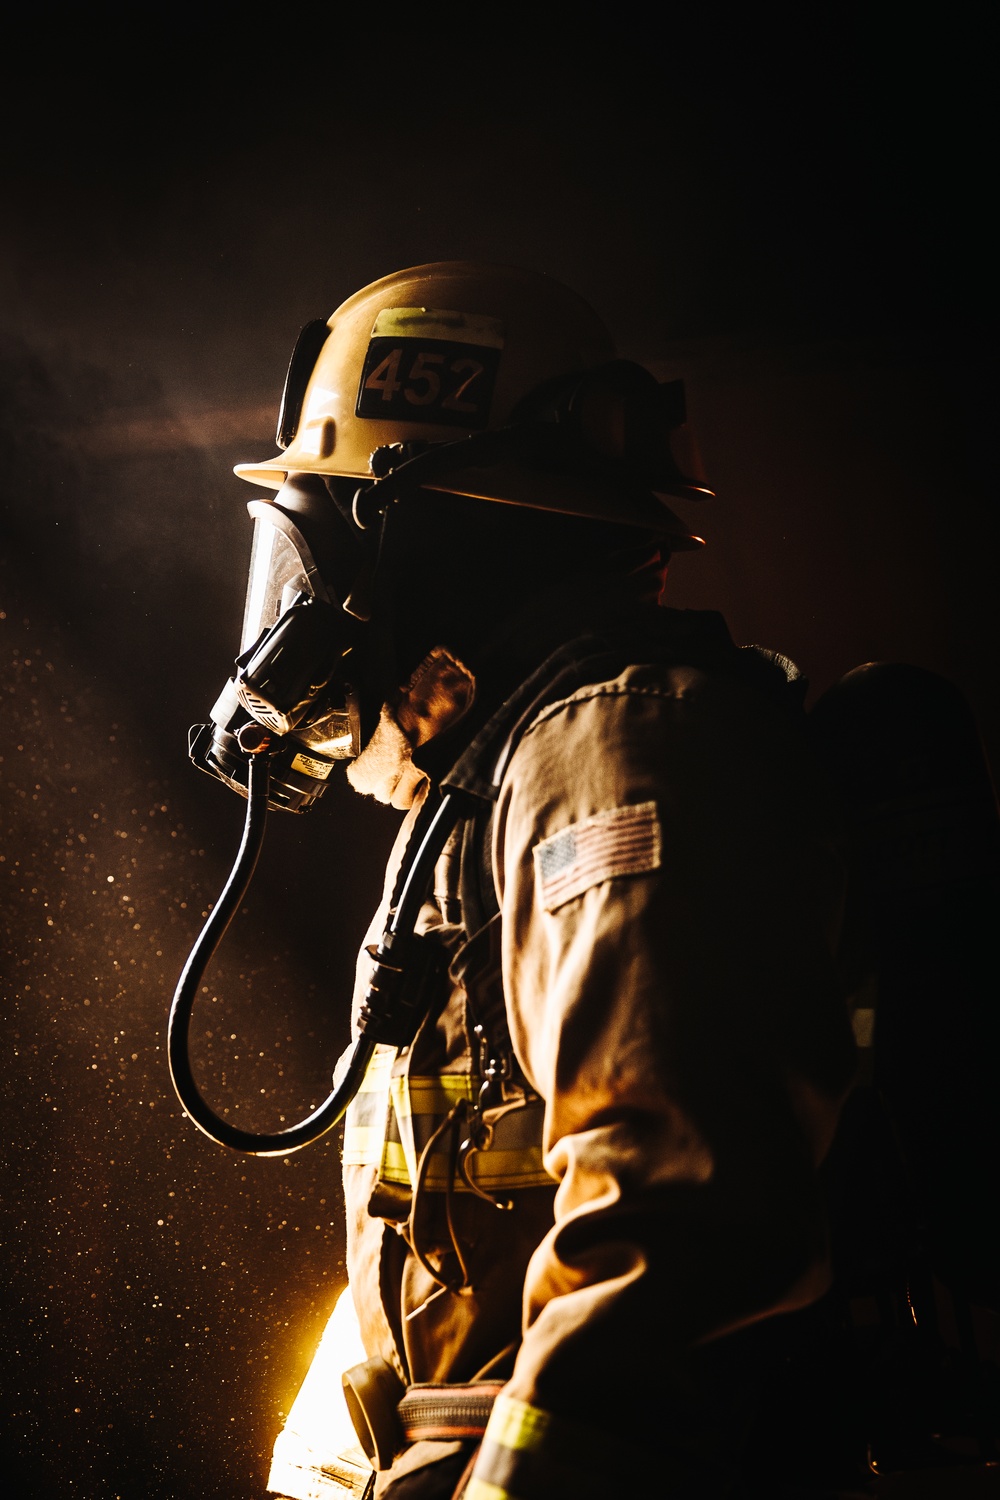 The Combat Center Firefighters conduct routine training to maintain readiness